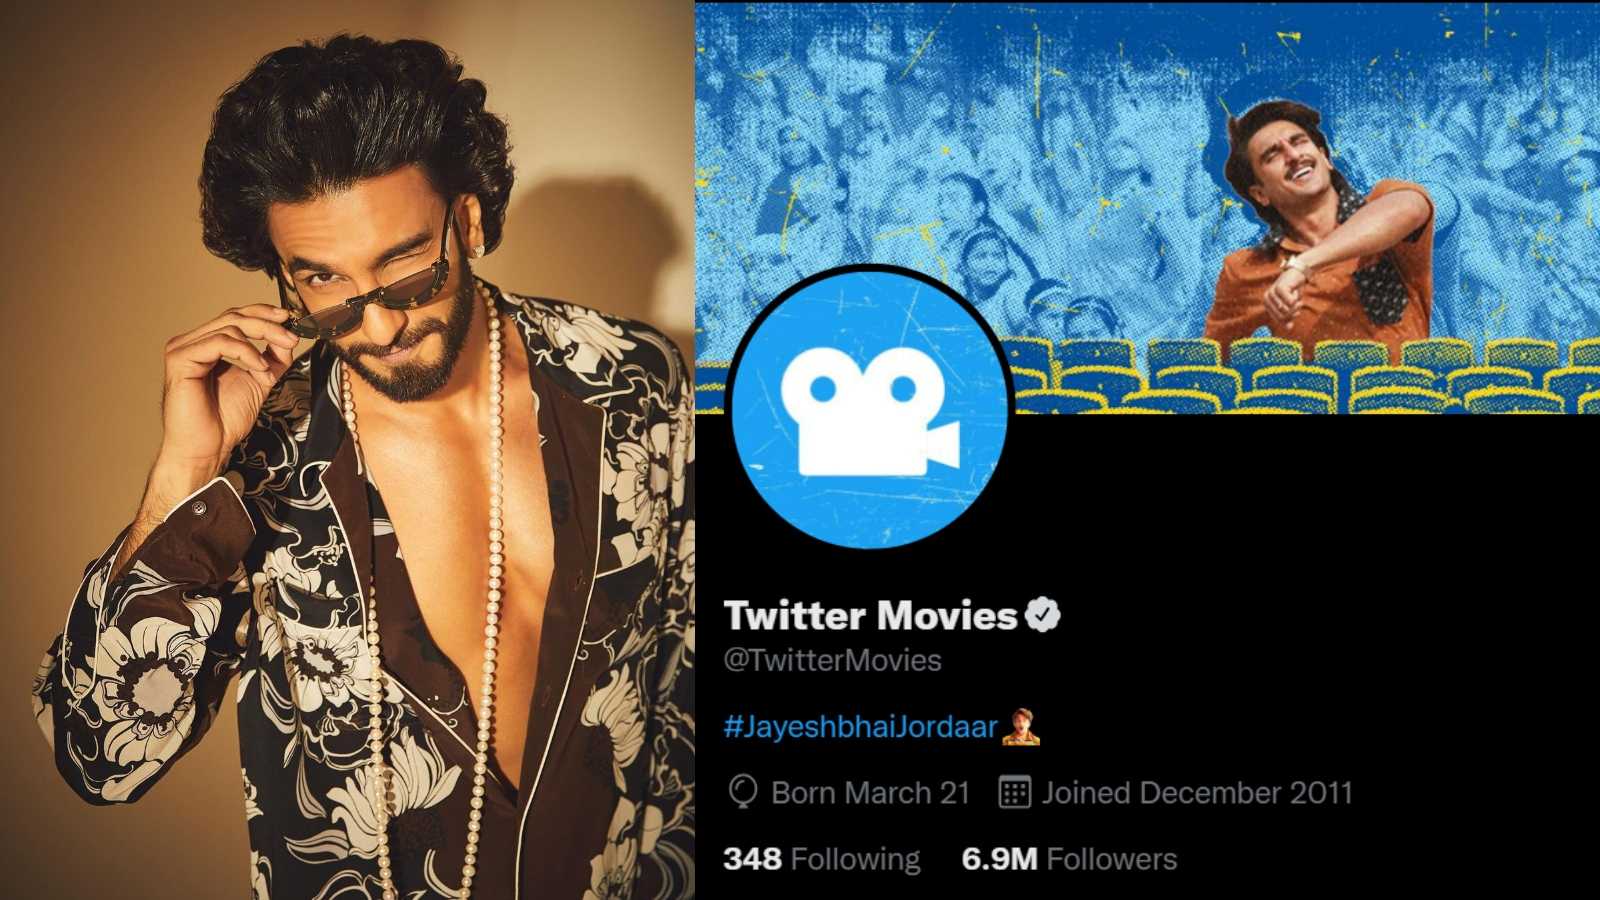 In a first for Bollywood, Ranveer Singh takes over the Twitter Movies account joining the likes of Tom Holland, Robert Pattinson